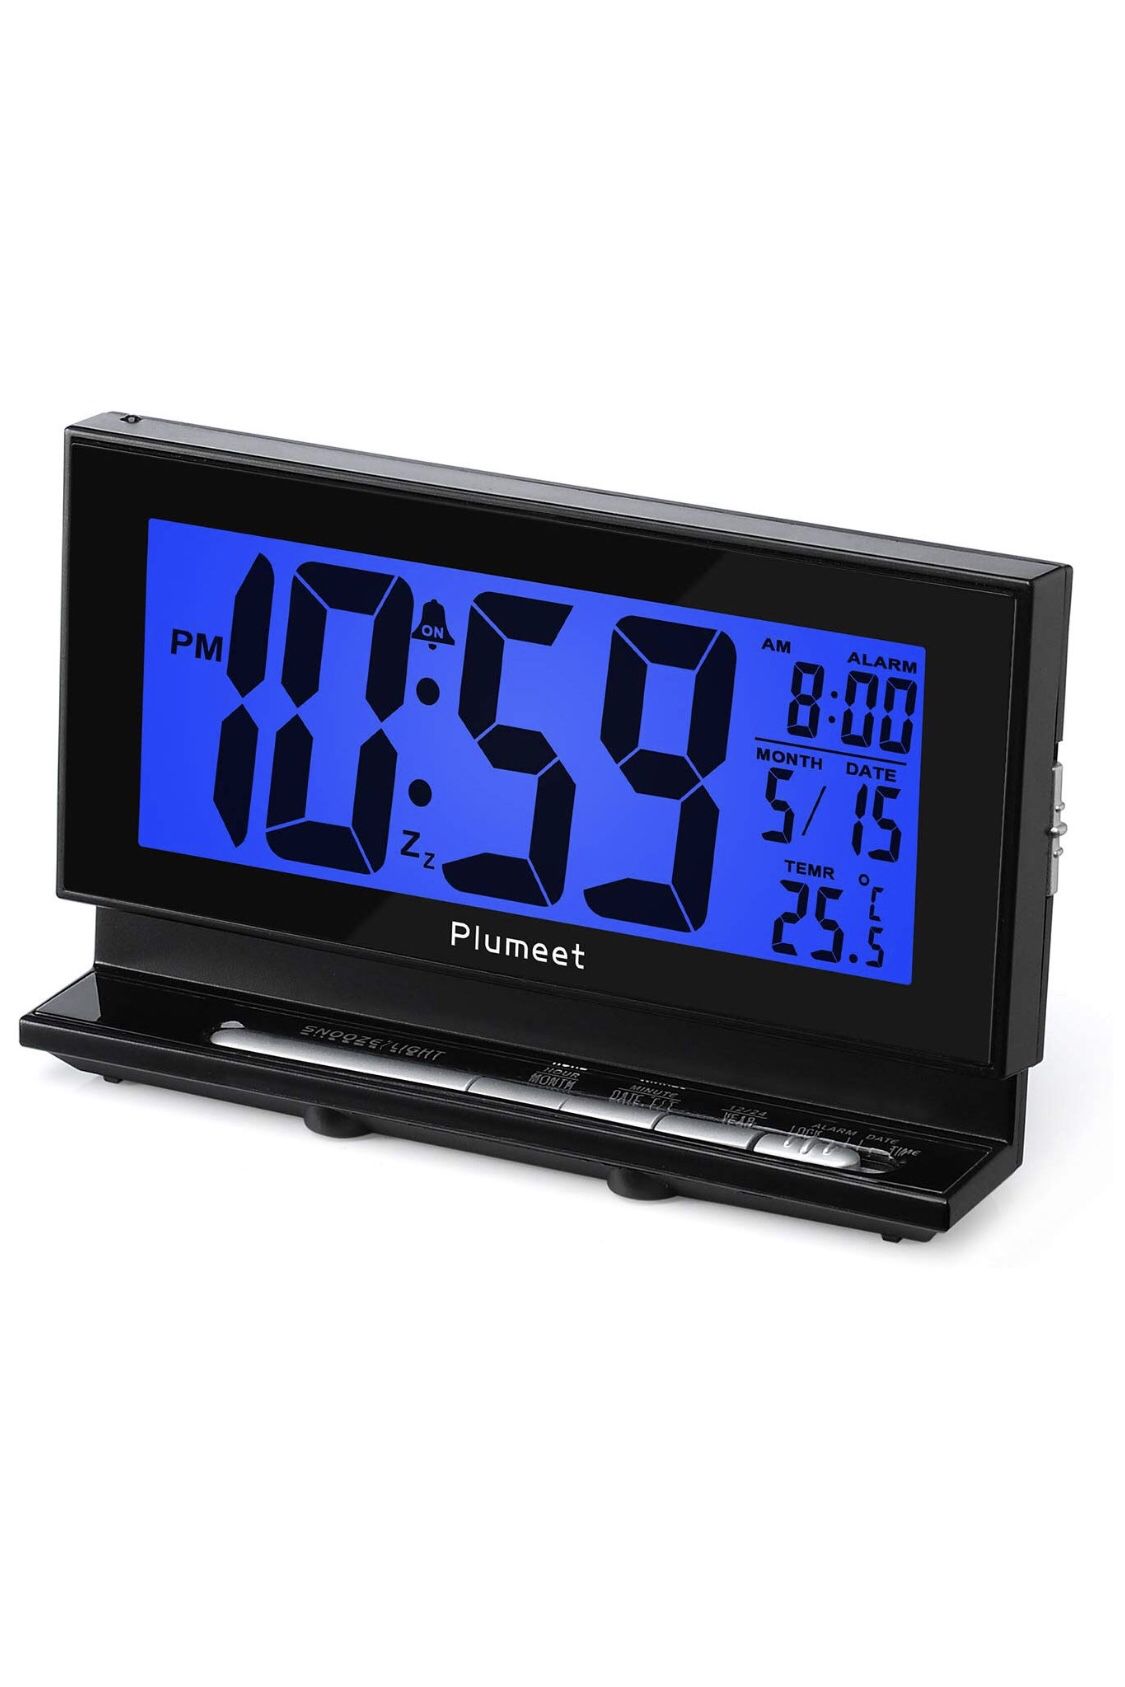 Brand-new!!! Auto-Night Light Clock, Digital Alarm Clock Large LCD Display with Low High Dimmer Backlight, Temperature, Calendar, Ascending Sound & S